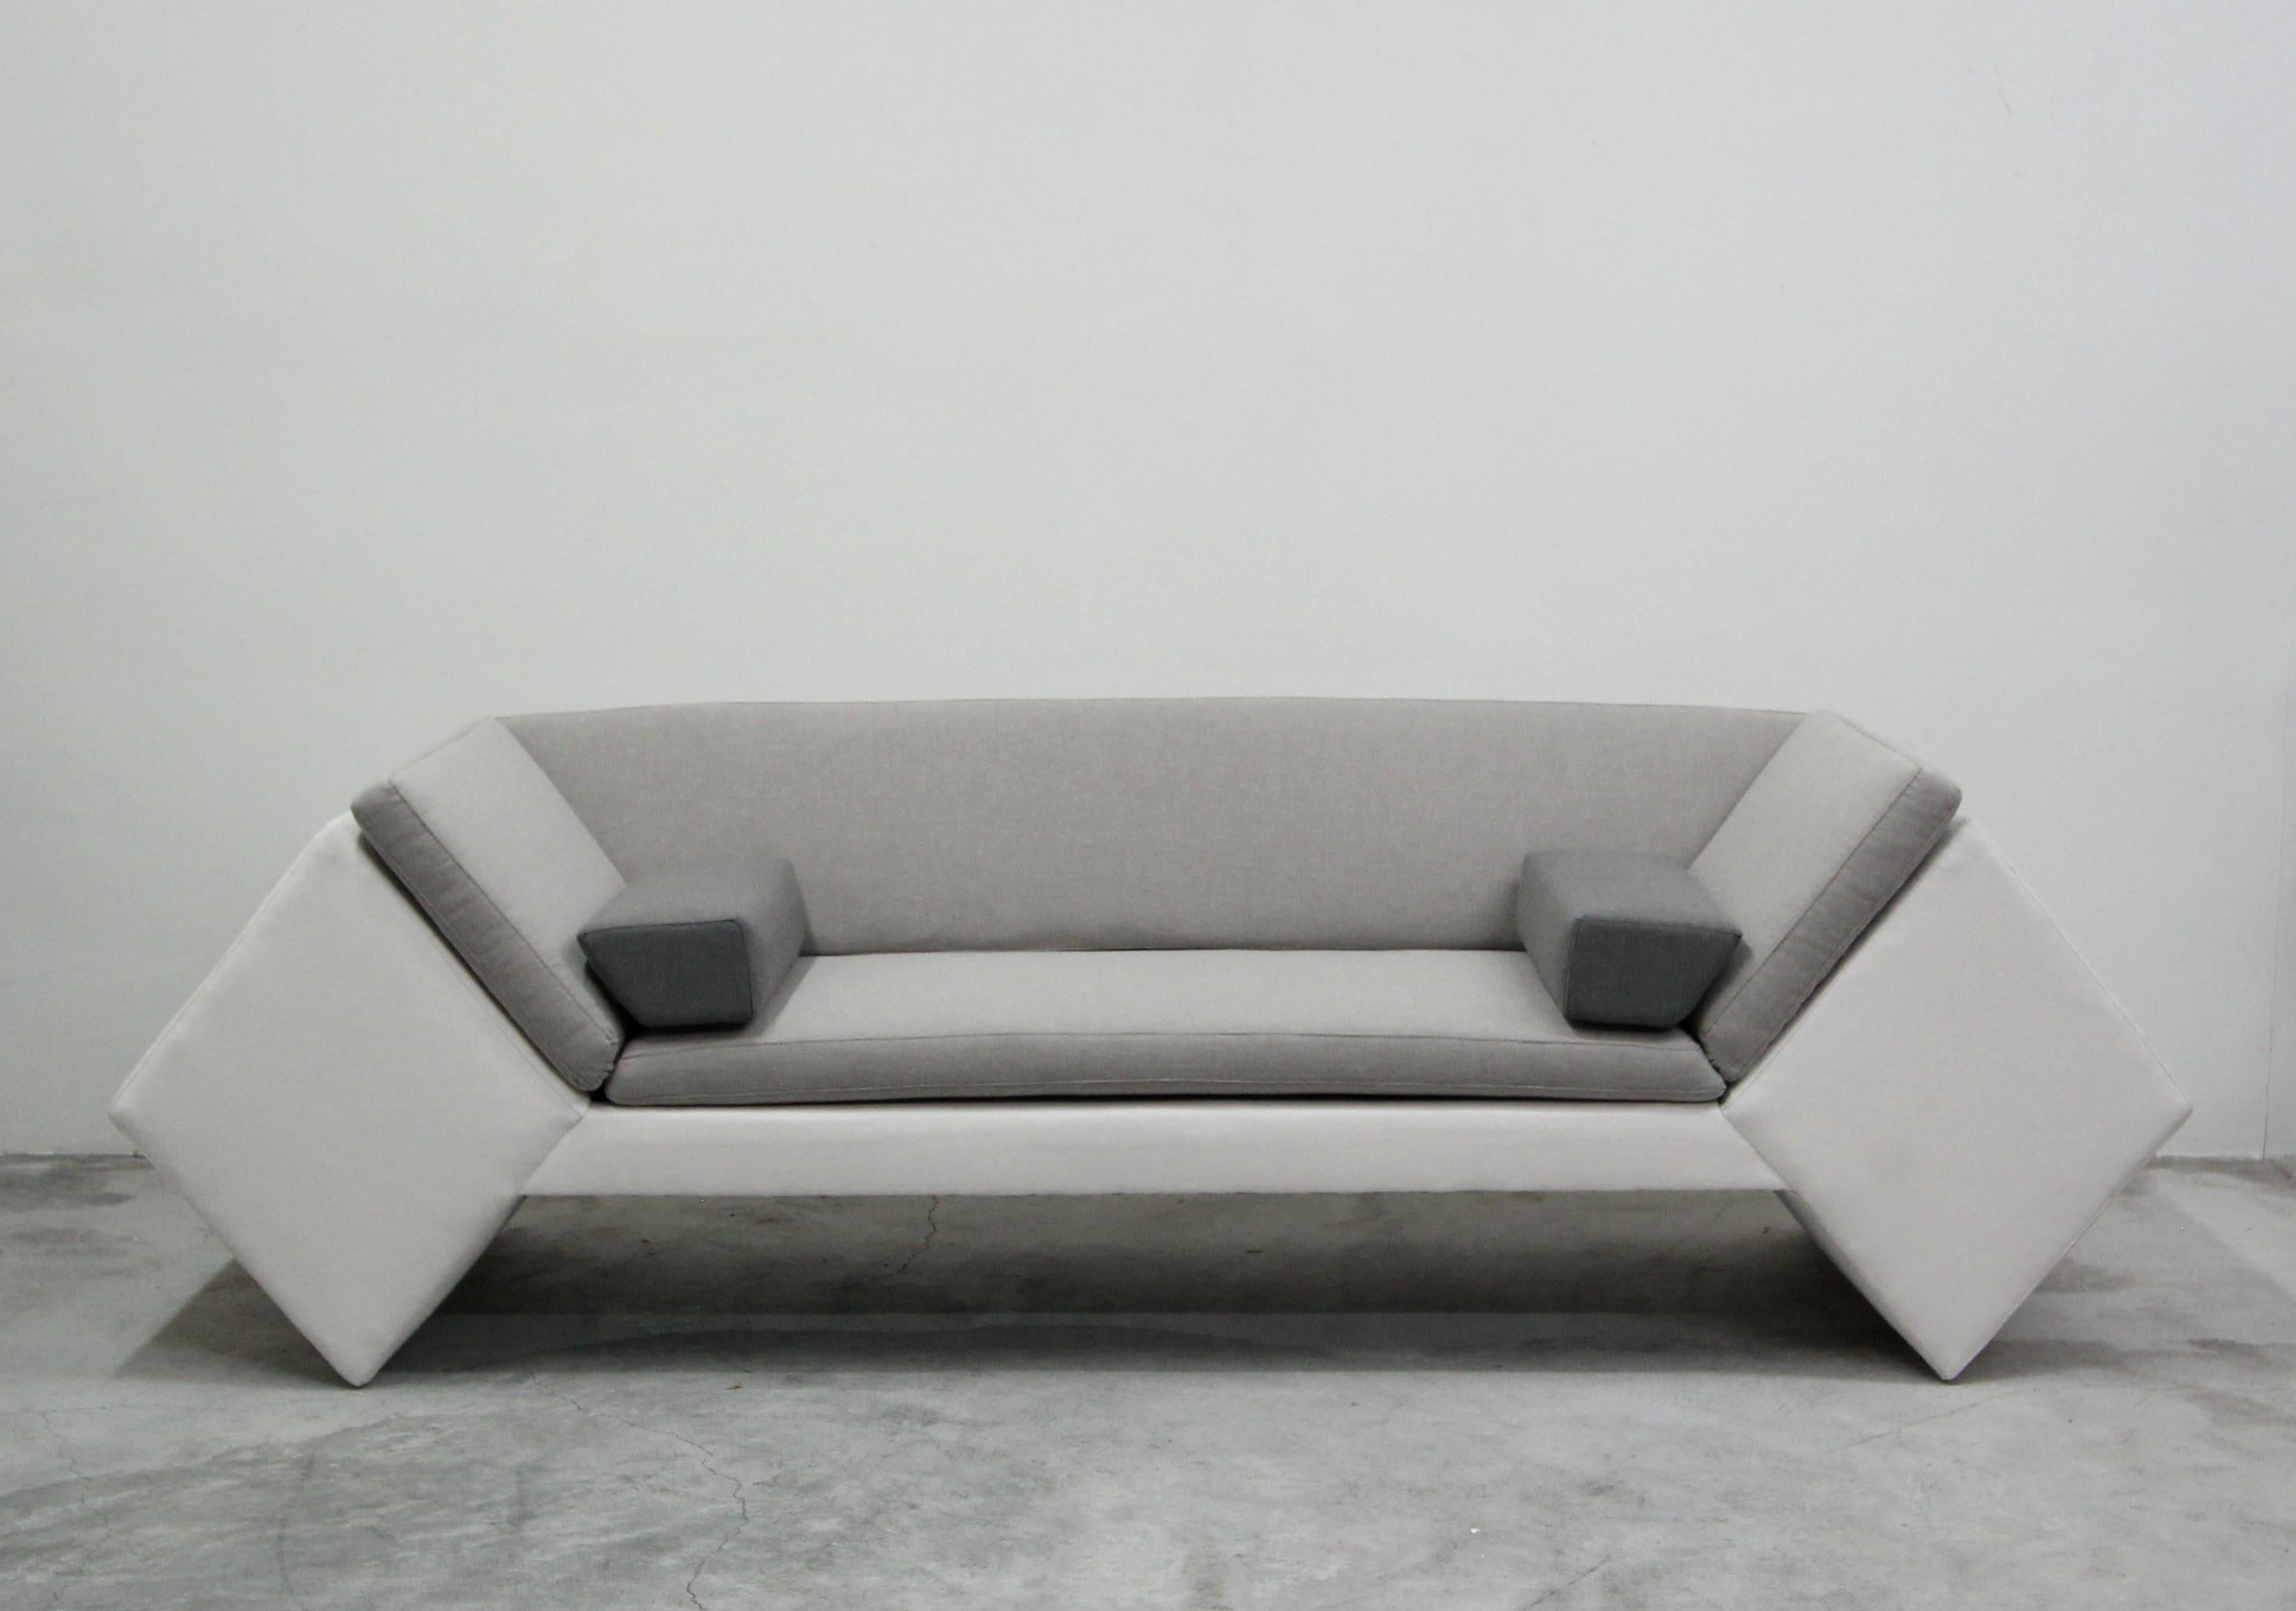 Rare geometric sofa, with a very postmodern feel. Love the linear lines and shapes that this unique piece has. Never seen anything like it.

Manufactured by Thayer Coggin (tagged) and designed by David Snyder.

Professionally reupholstered with